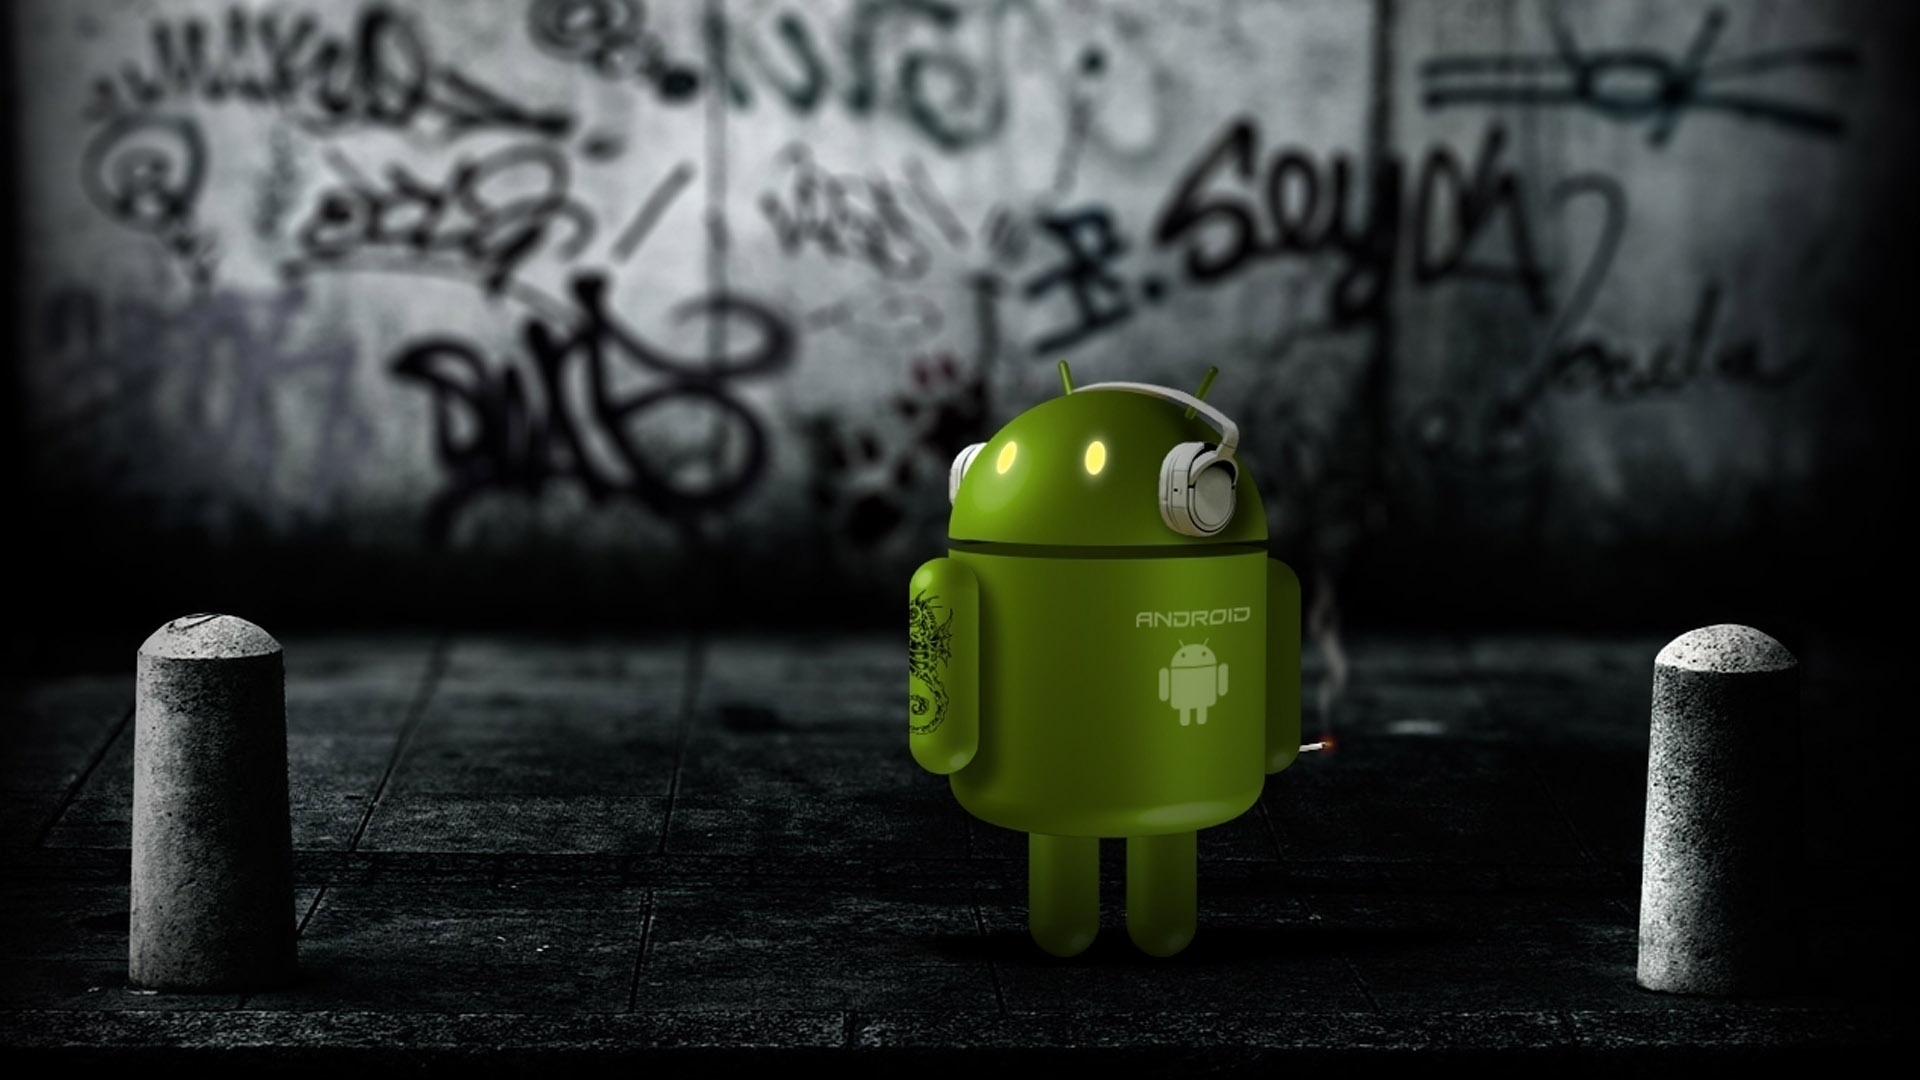 Technology Android HD Wallpaper